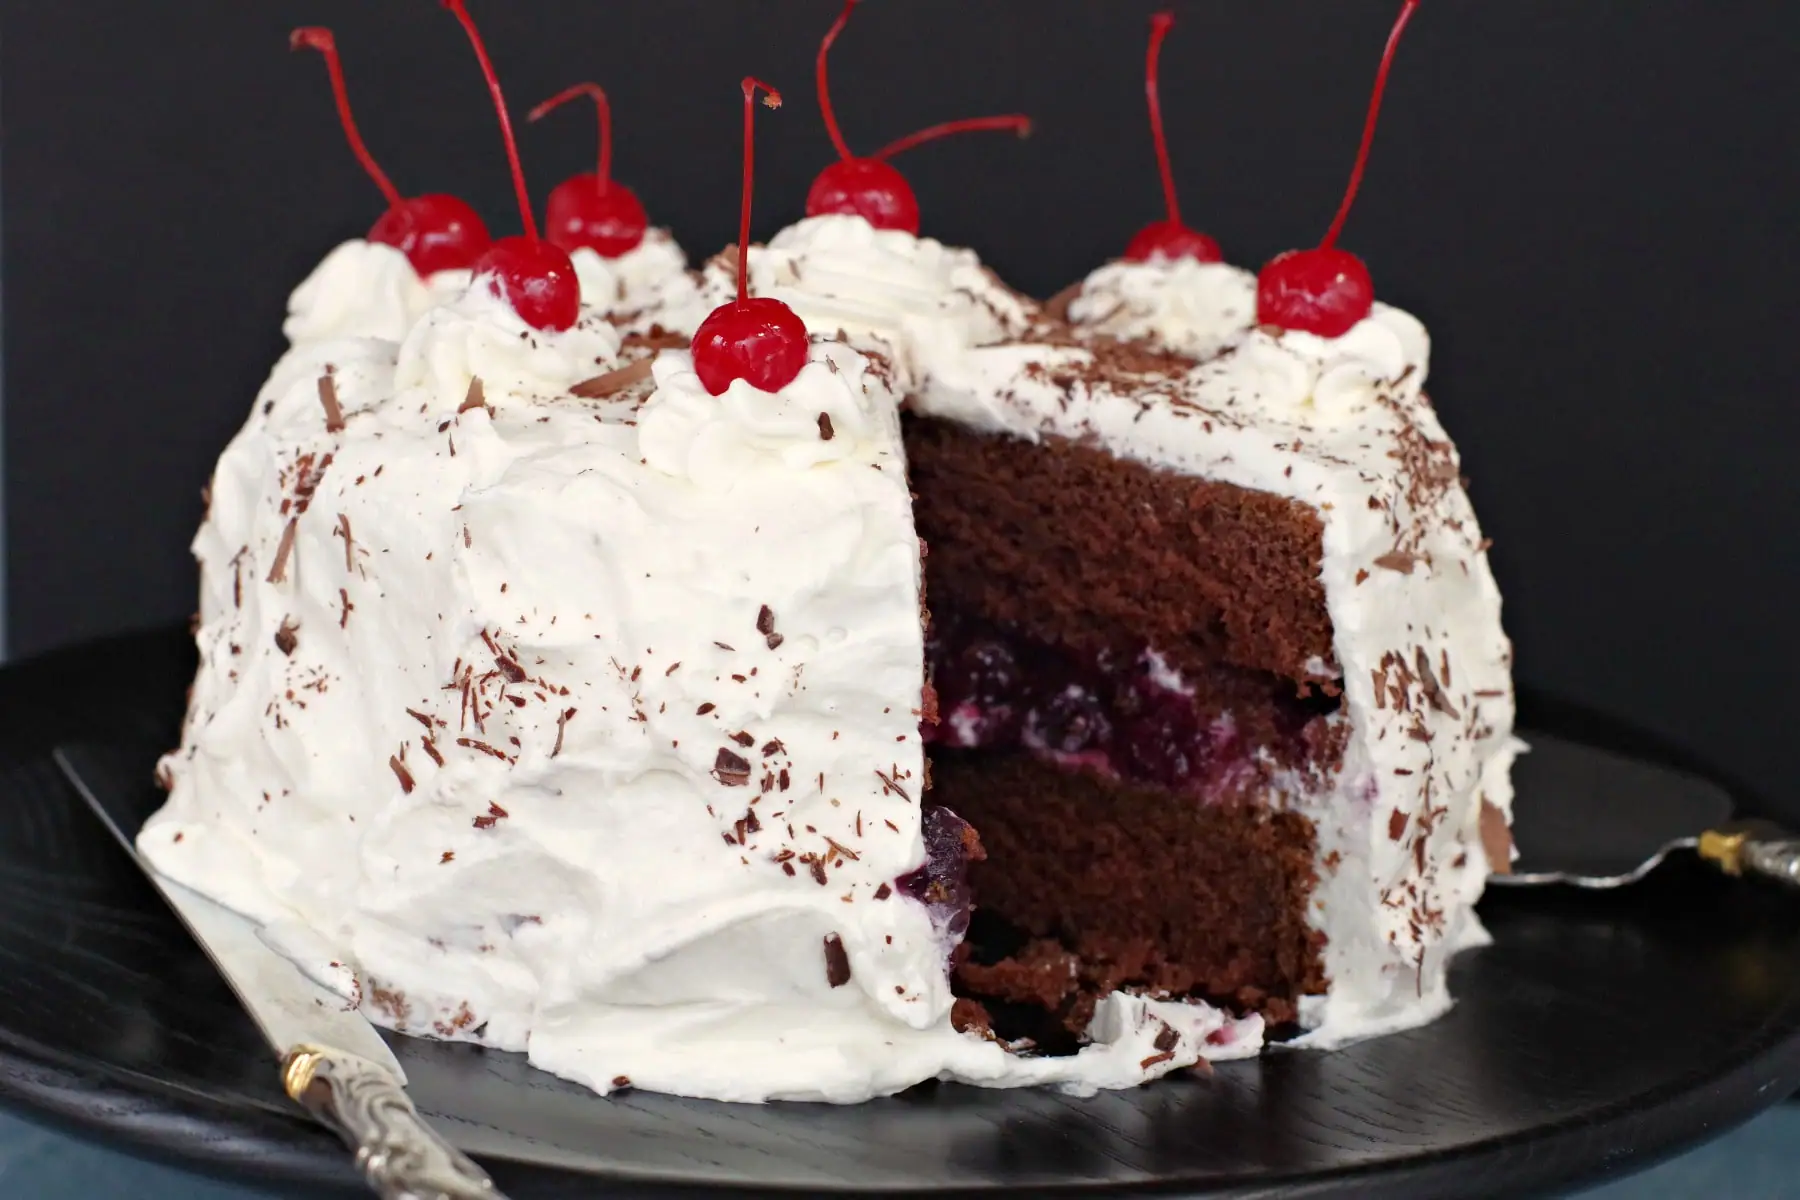 Homemade Black forest cake with slice taken out